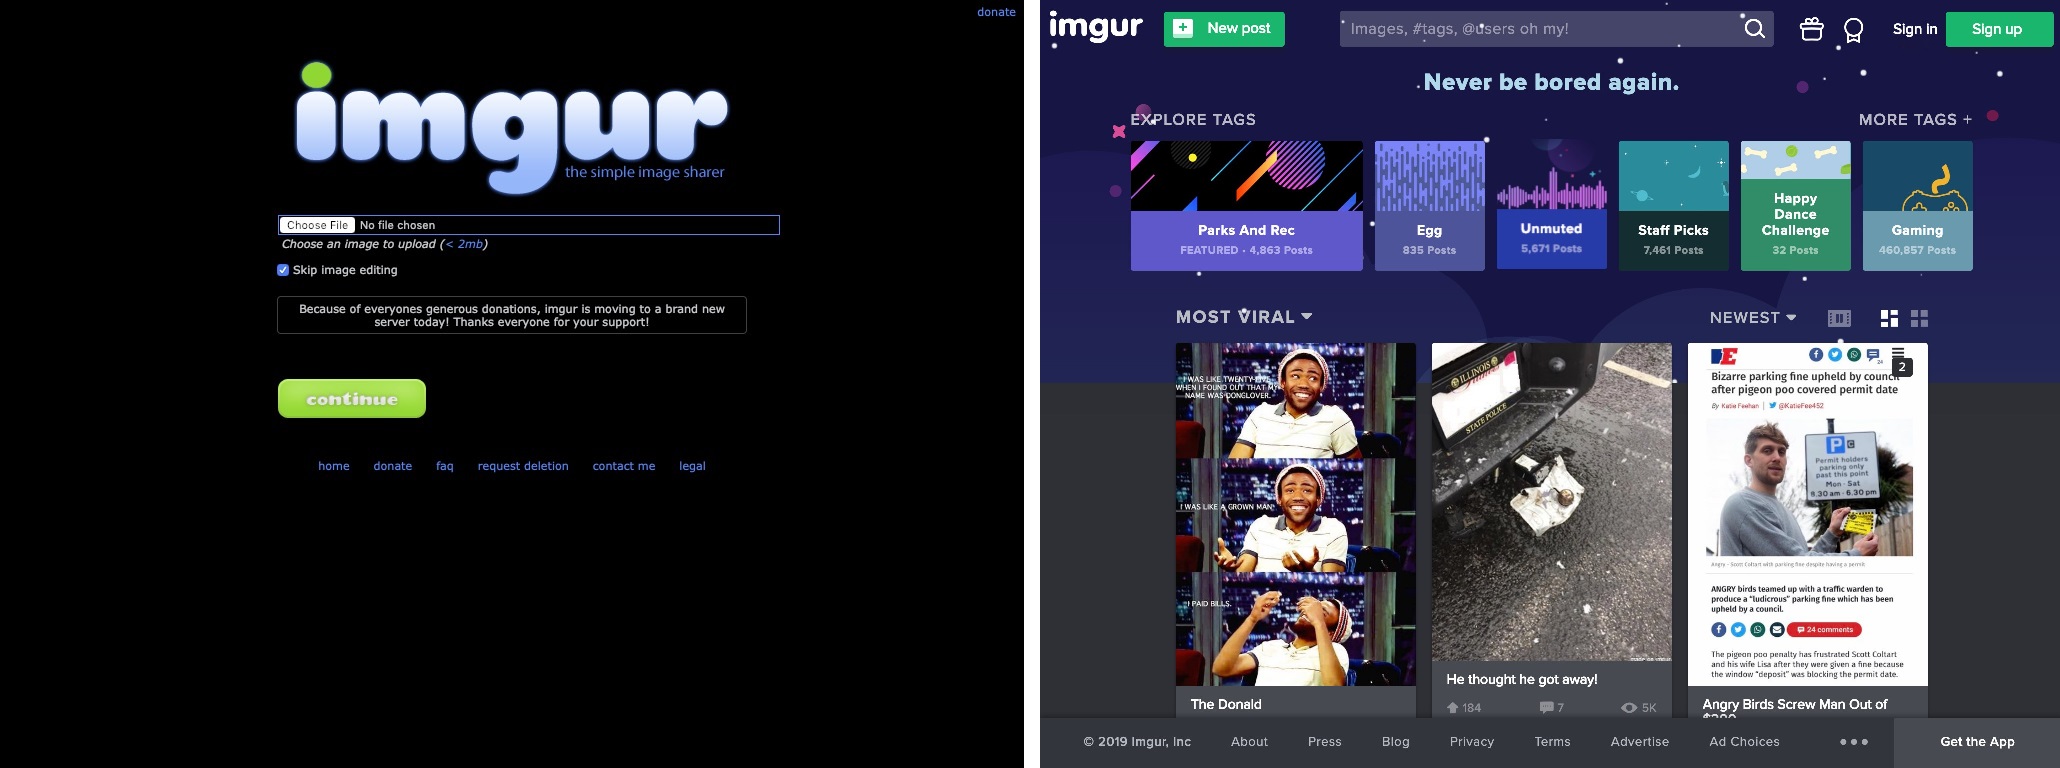 imgur - donate imgur New post Images, , oh my! Sign in Sign up Never be bored again. tur Explore Tags More Tags the simple image r Lacur Choose File No file chosen Choose an image to upload